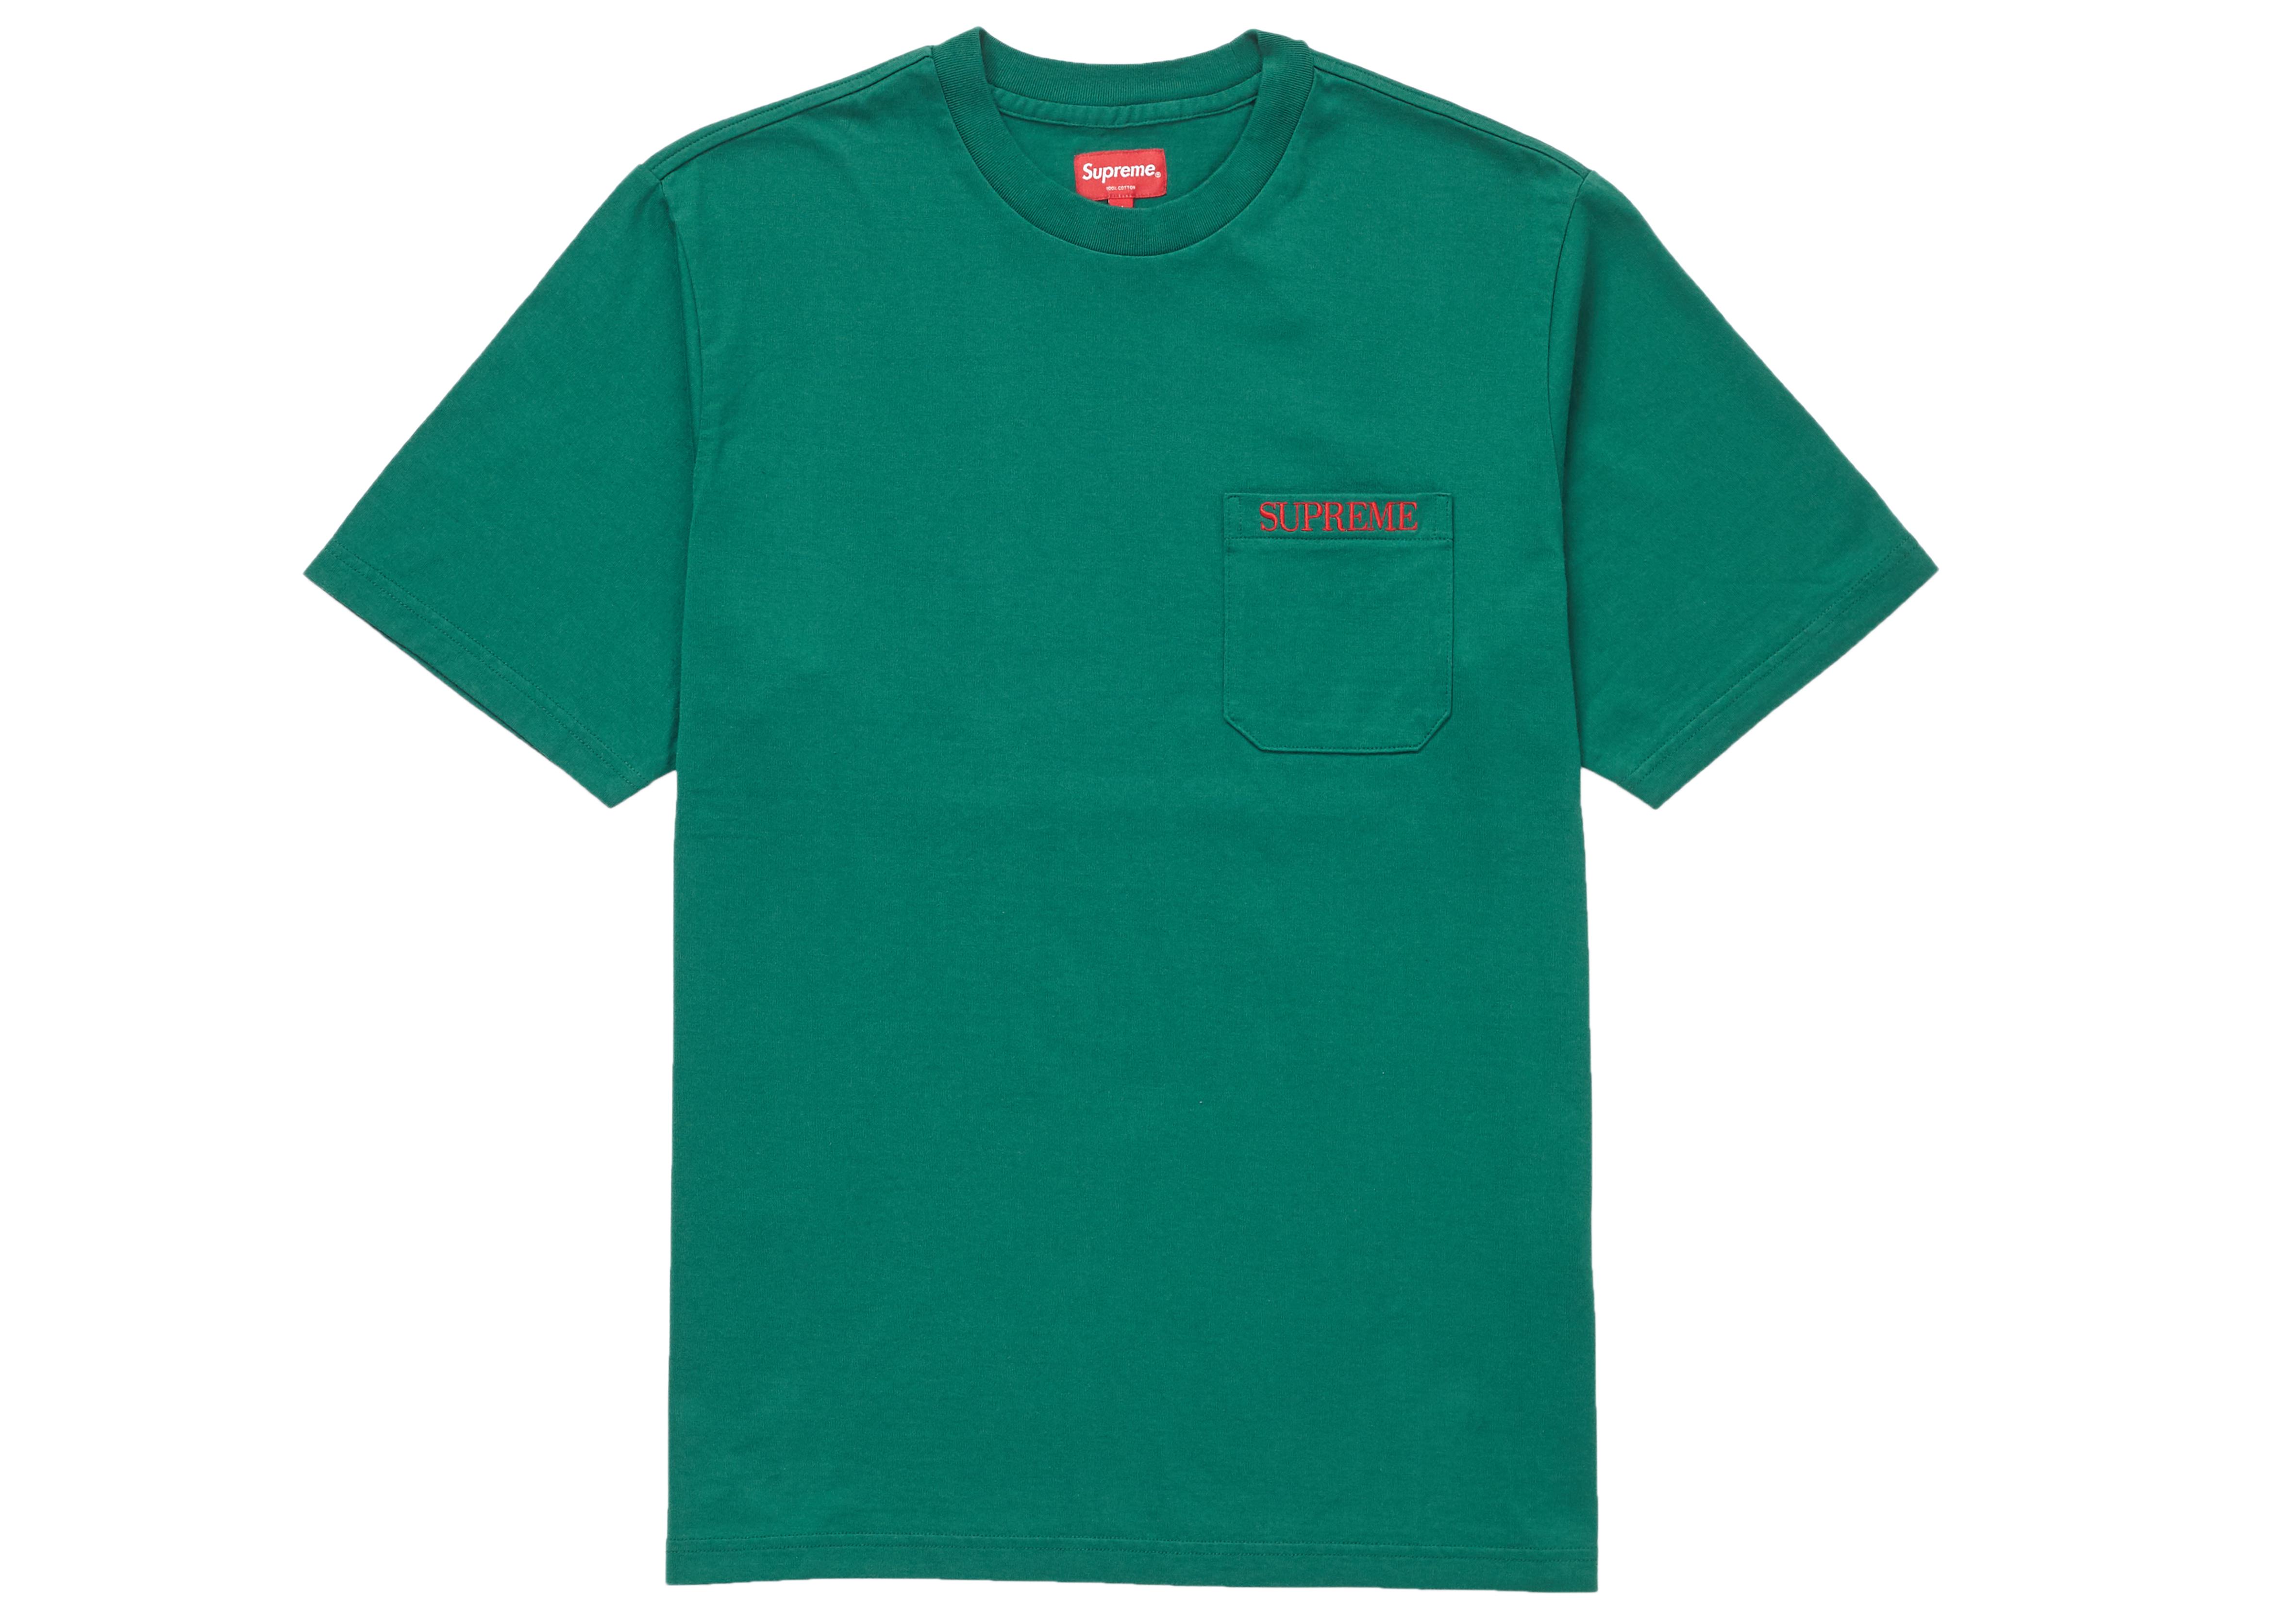 Lyst - Supreme Embroidered Pocket Tee Green in Green for Men